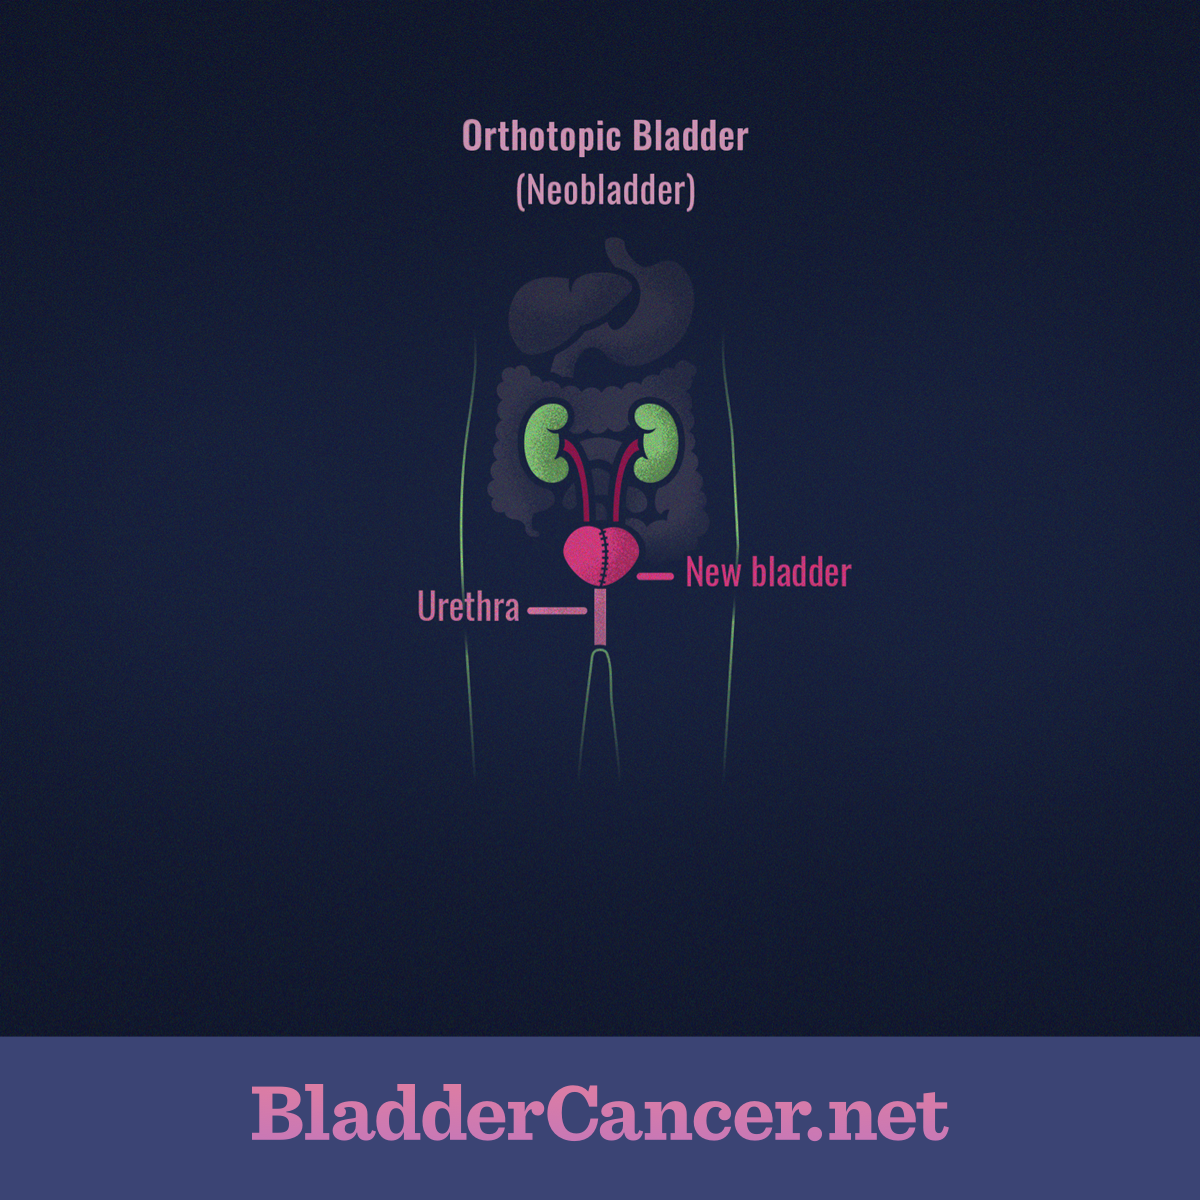 Diagram of an Orthotopic Bladder, or new bladder, connected to the urethra